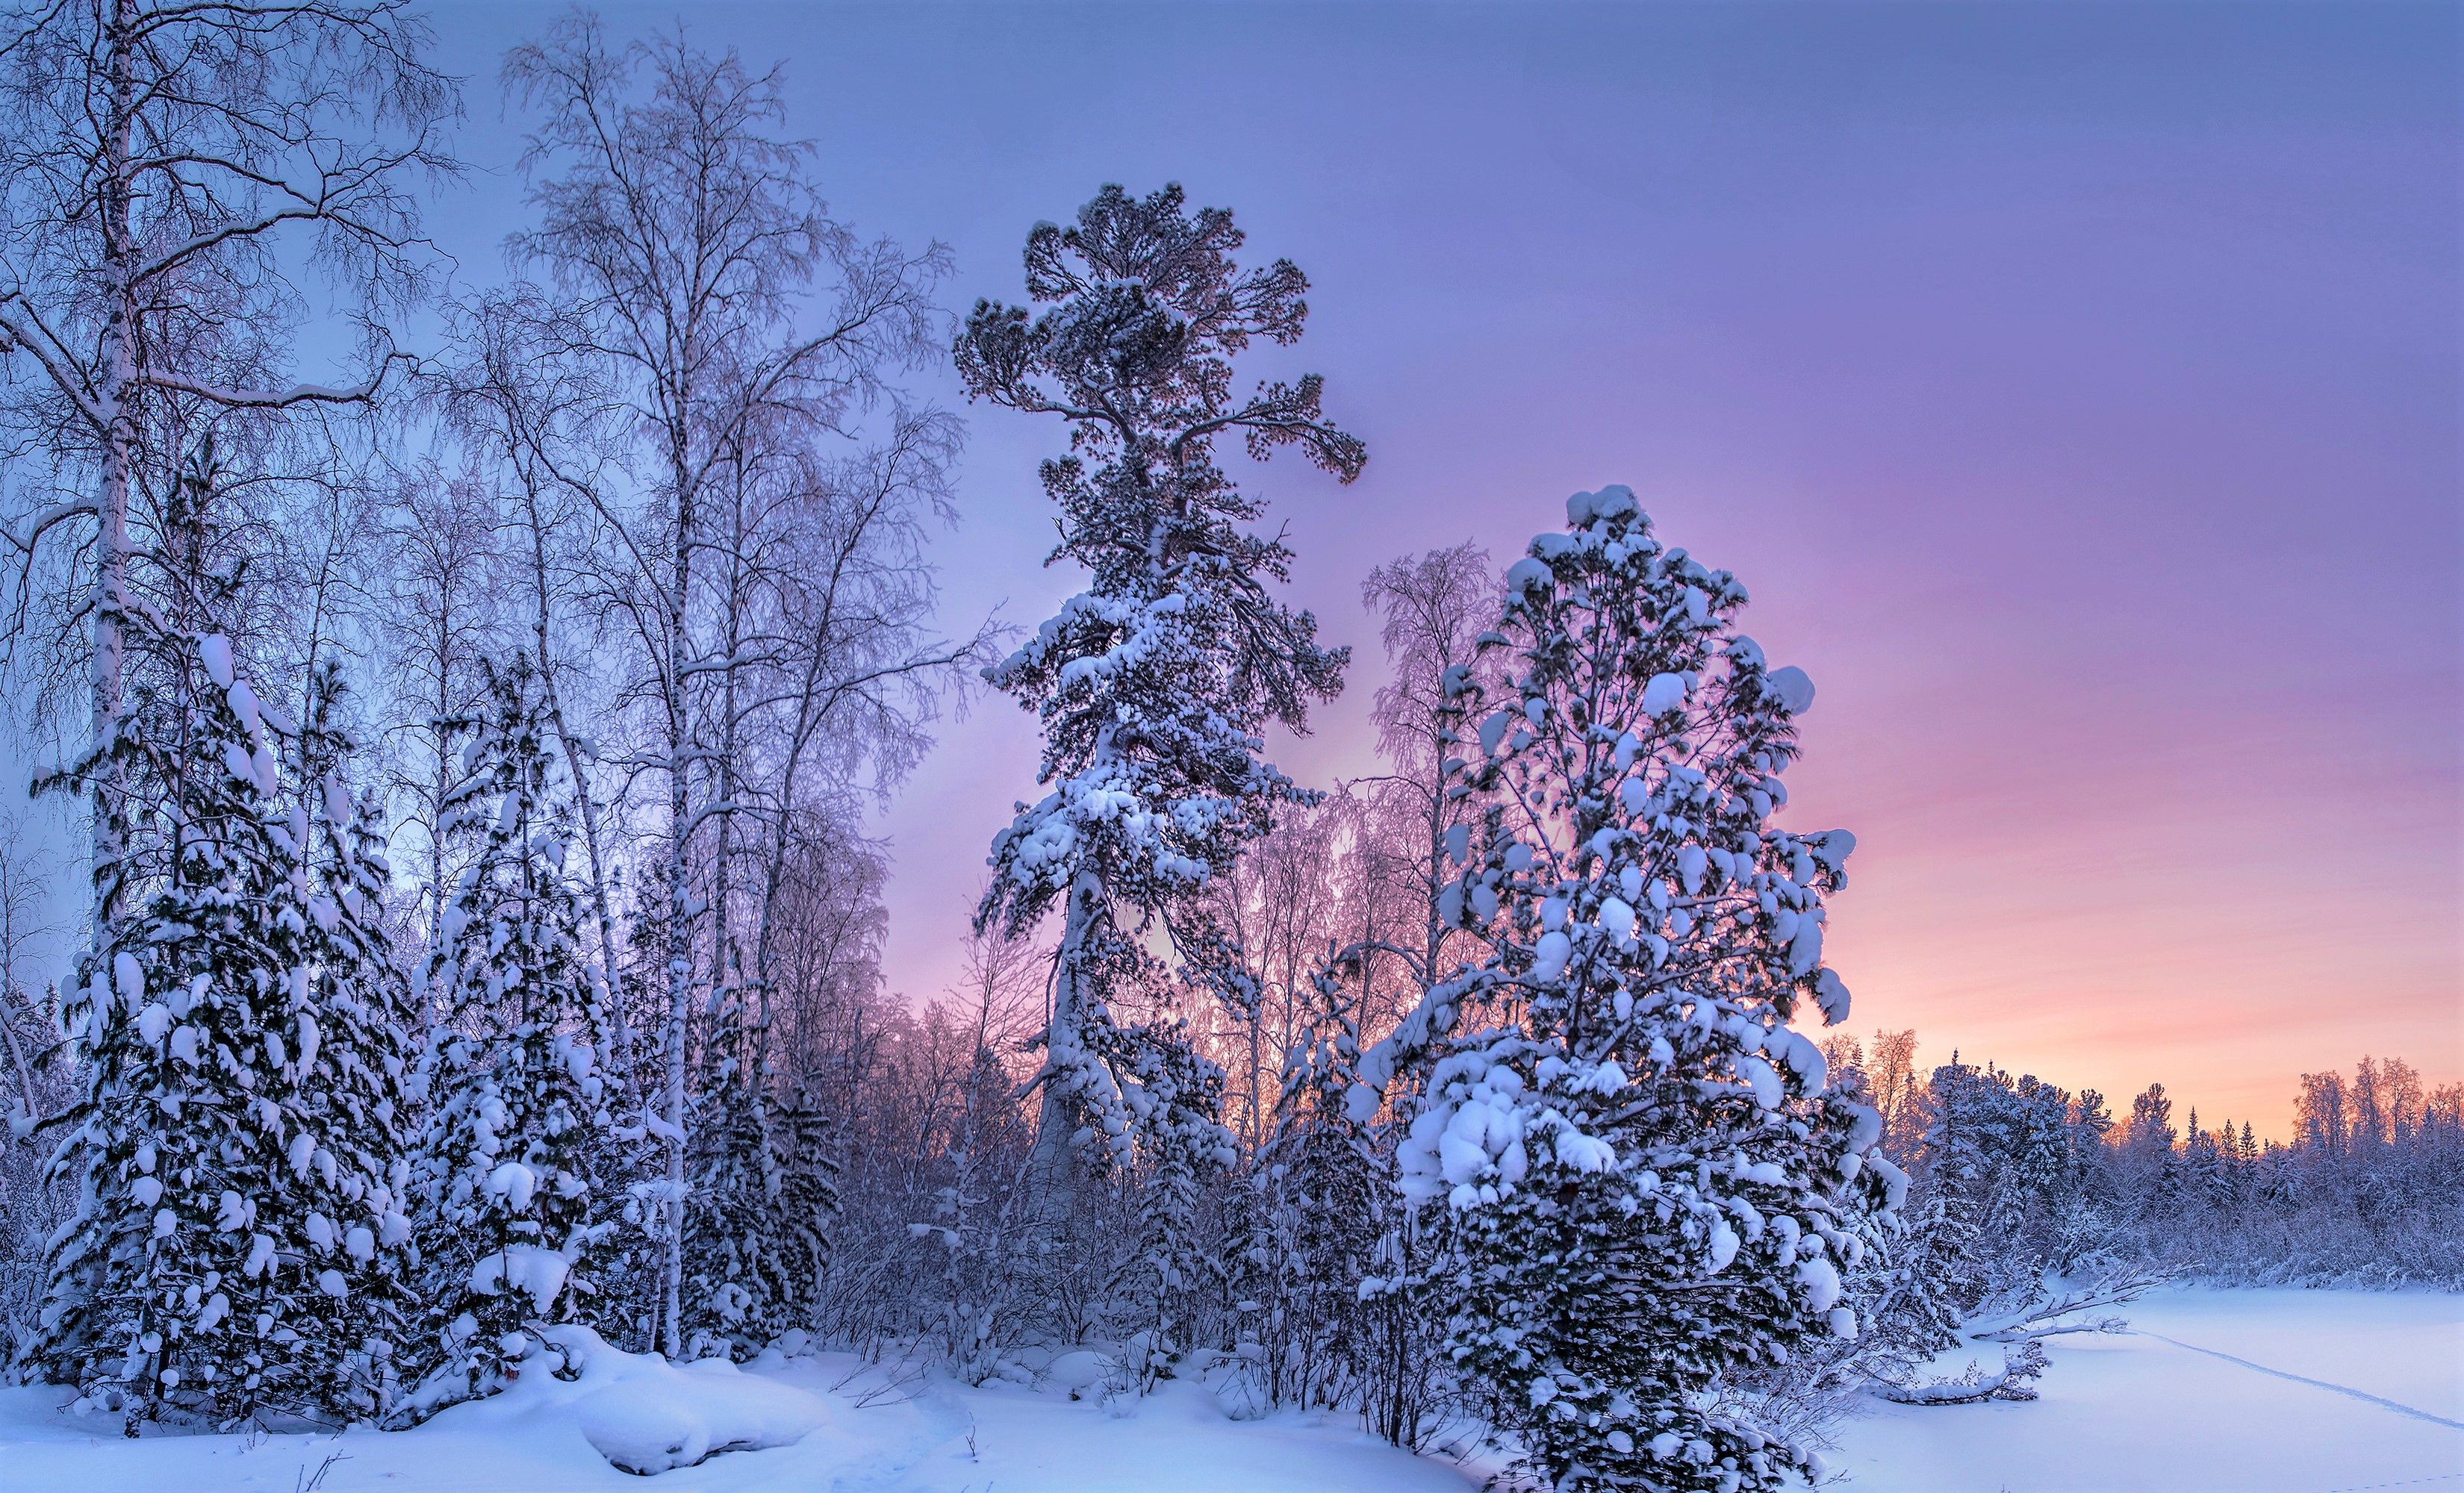 Earth Forest Sky Snow Sunset Winter 3300x2000